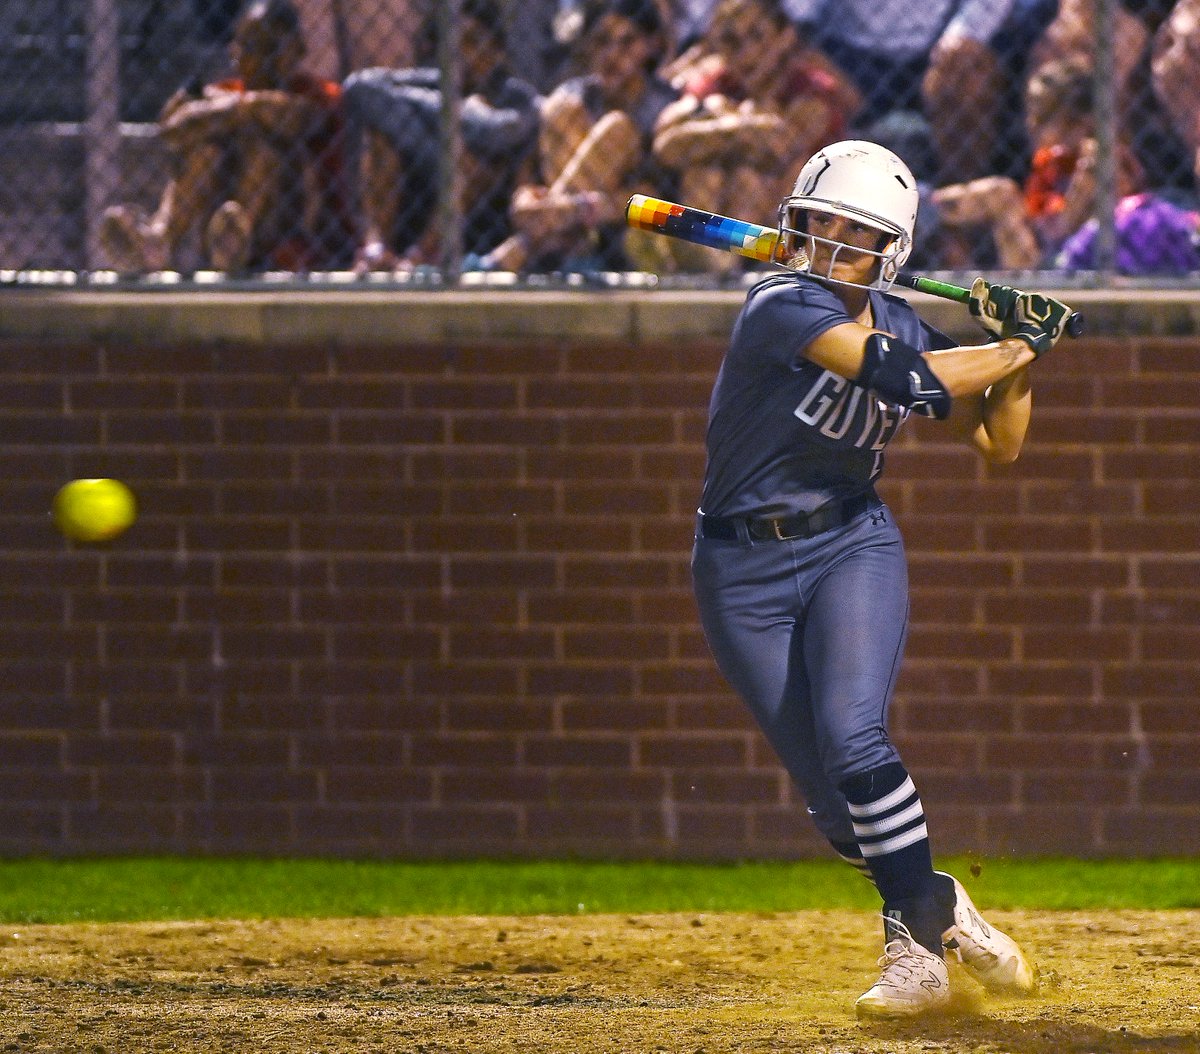 Three local softball teams got their third-round matchups rolling on Wednesday. Guyer punched its ticket to Round 4 of the playoffs for a second straight year as Kaylynn Jones homered to help fuel a 7-2 victory over Flower Mound Marcus. dentonrc.com/sports/high_sc…